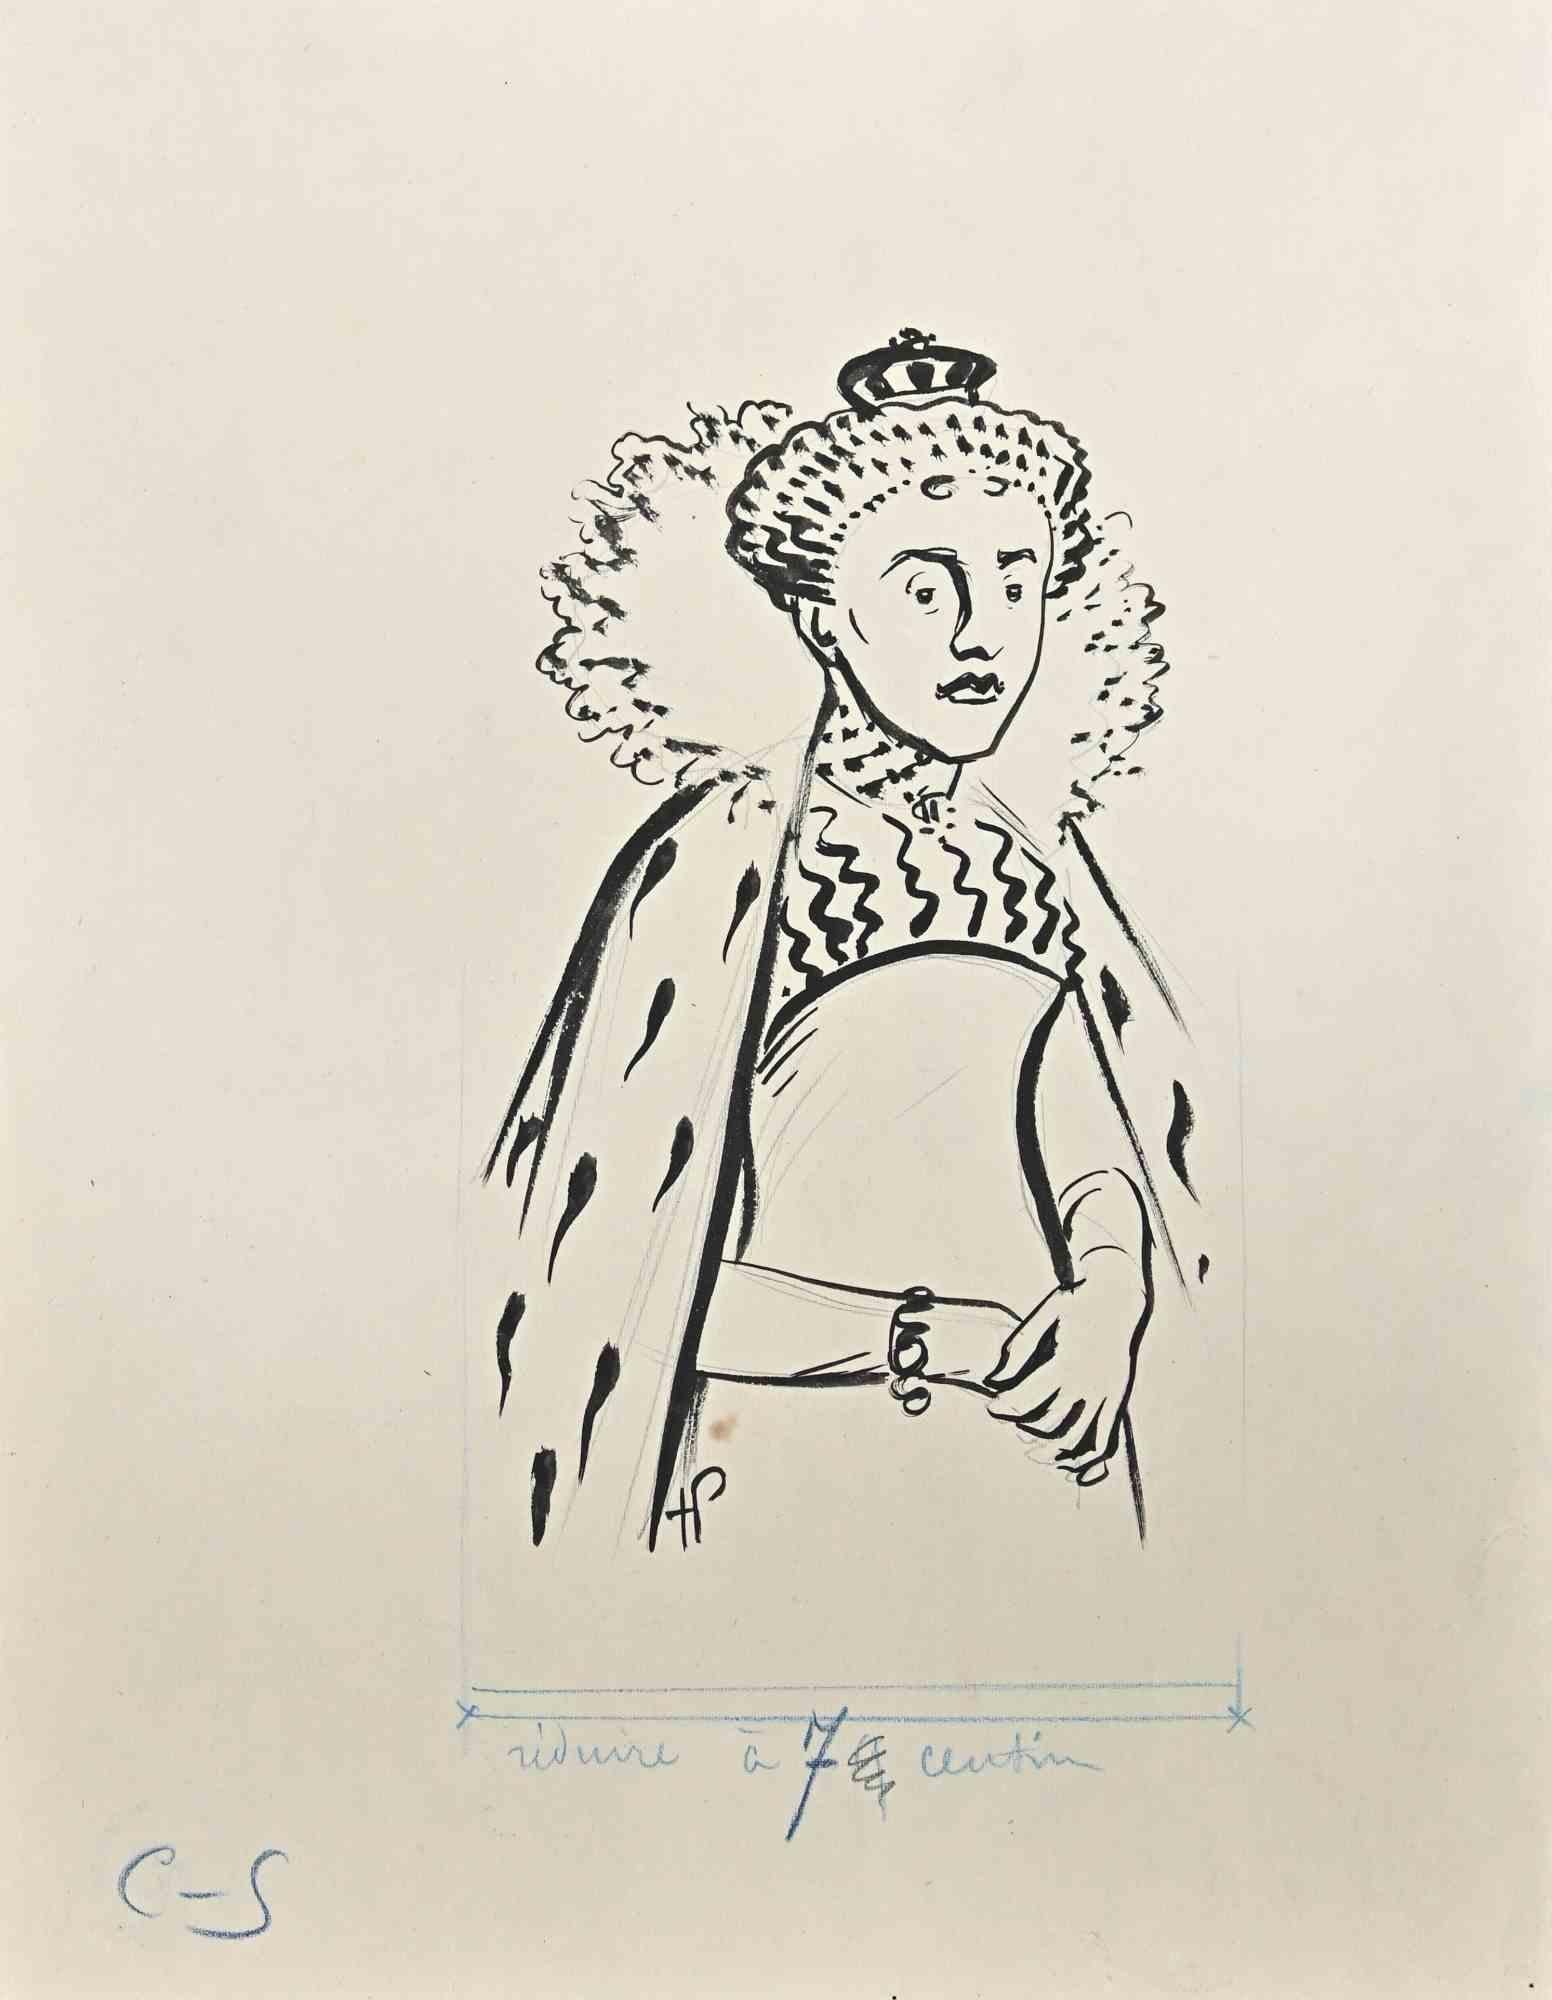 Portrait of a Noblewoman is a black market Drawing realized by Hermann Paul. 

Hand signed on the lower left corner.

Good condition.

René Georges Hermann-Paul (27 December 1864 – 23 June 1940) was a French artist. He was born in Paris and died in